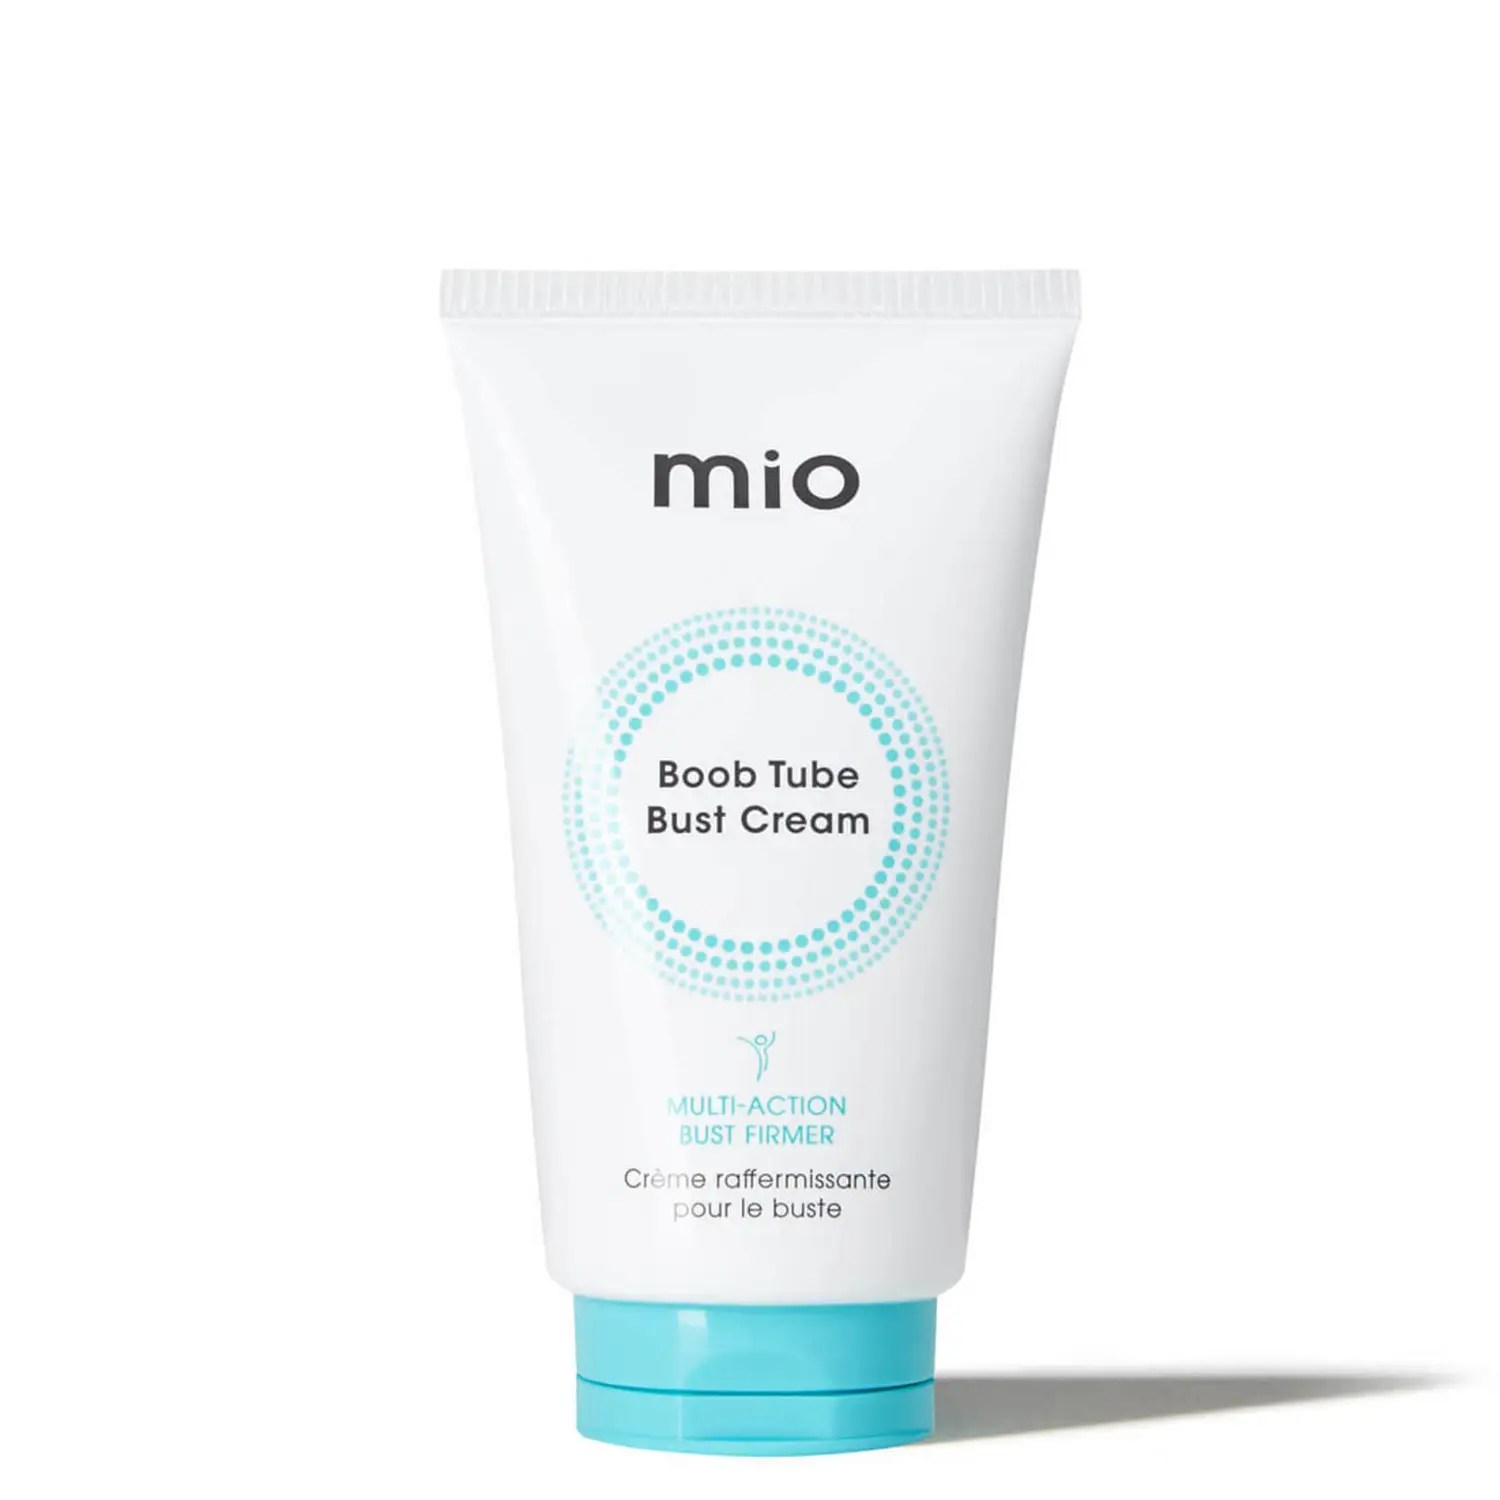 mio boob tube bust cream, best creams for breasts